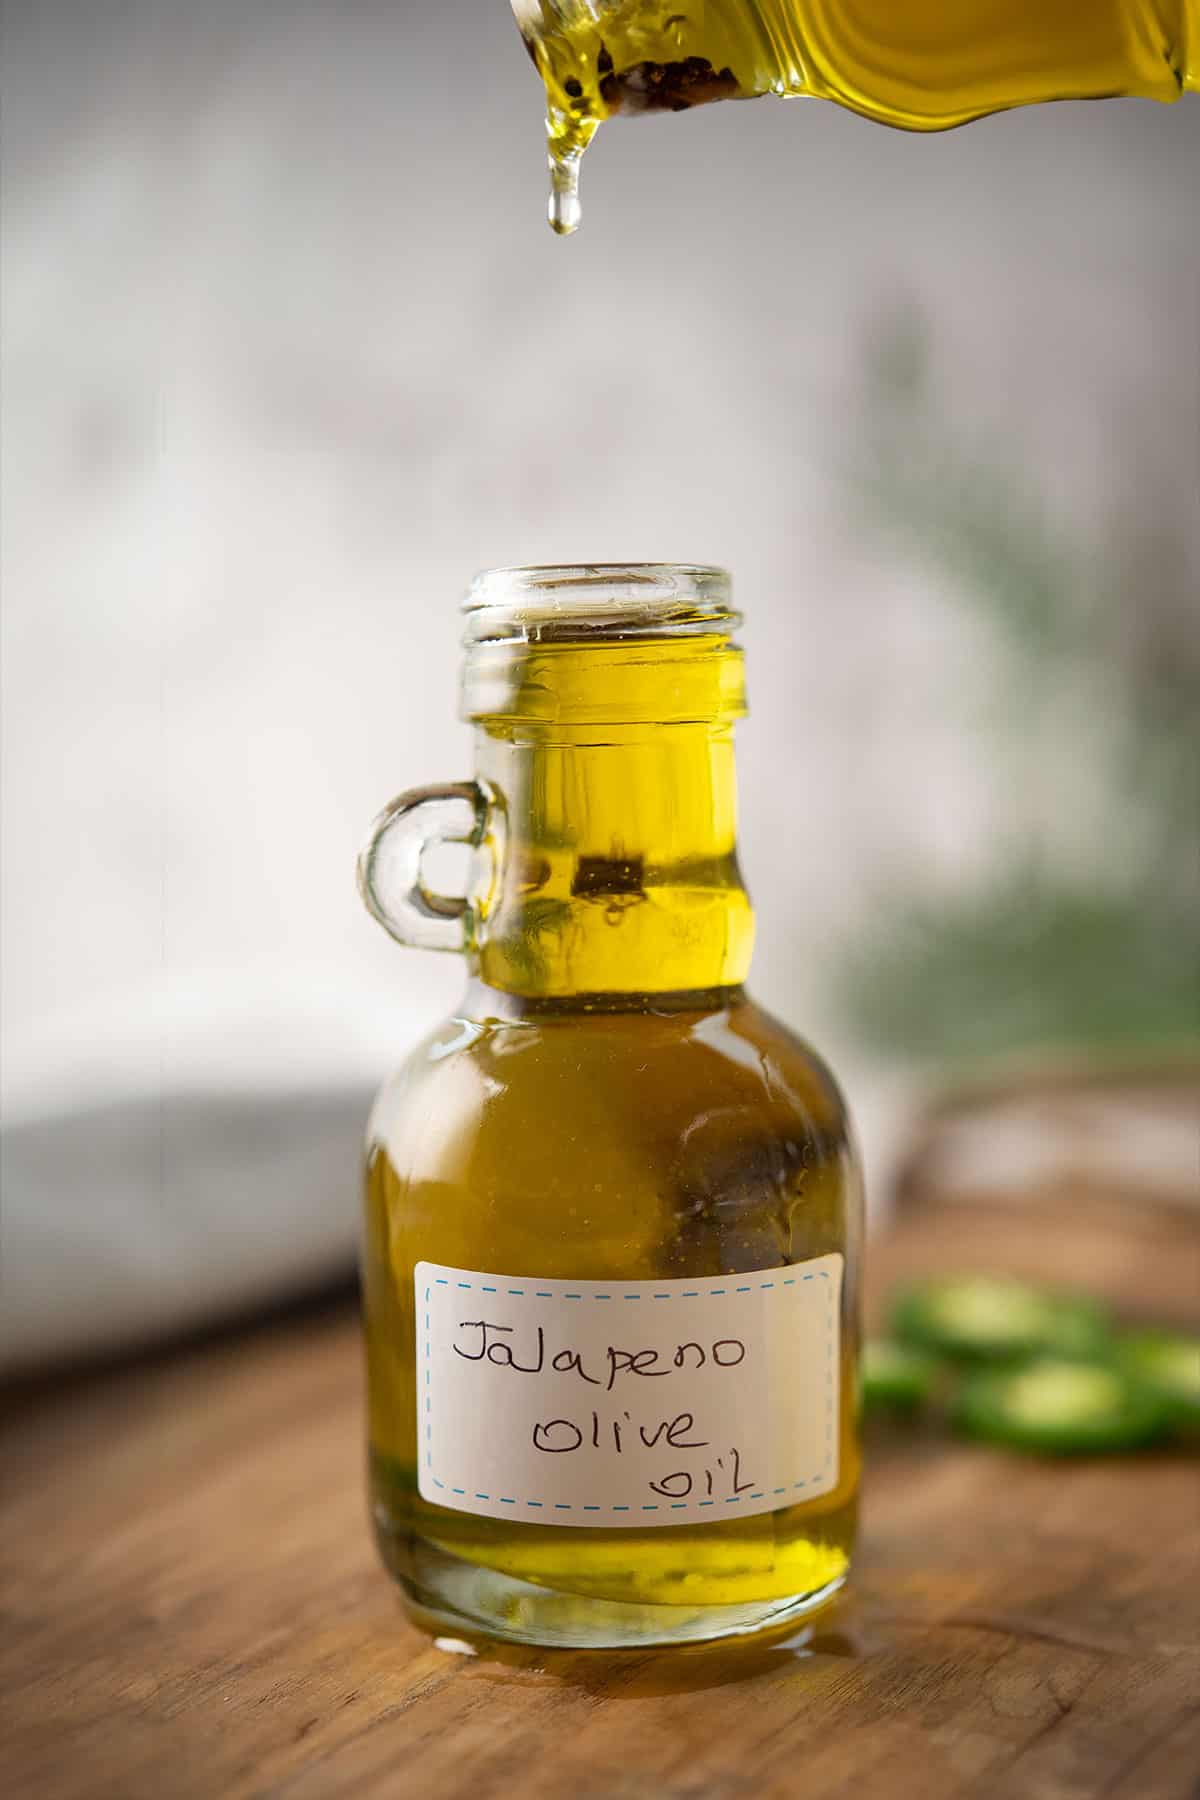 jalapeno olive oil stored in a decorative glass jar